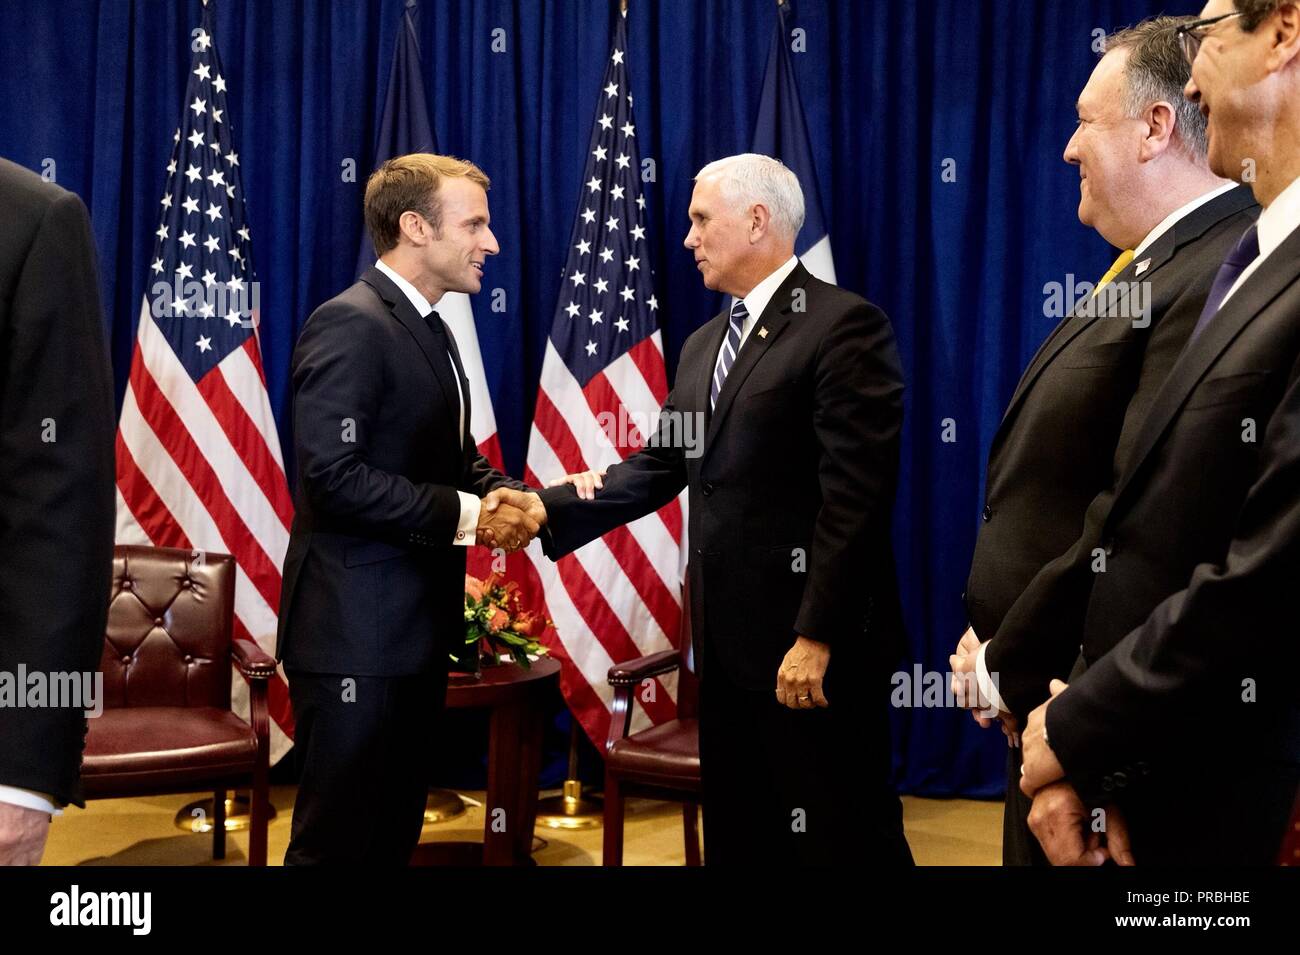 U.S Vice President Mike Pence shakes hands with French President Emmanuel Macron, left, before the start of a bilateral meeting with President Donald Trump on the sidelines of the United Nations General Assembly meetings September 24, 2018 in New York, New York. Stock Photo